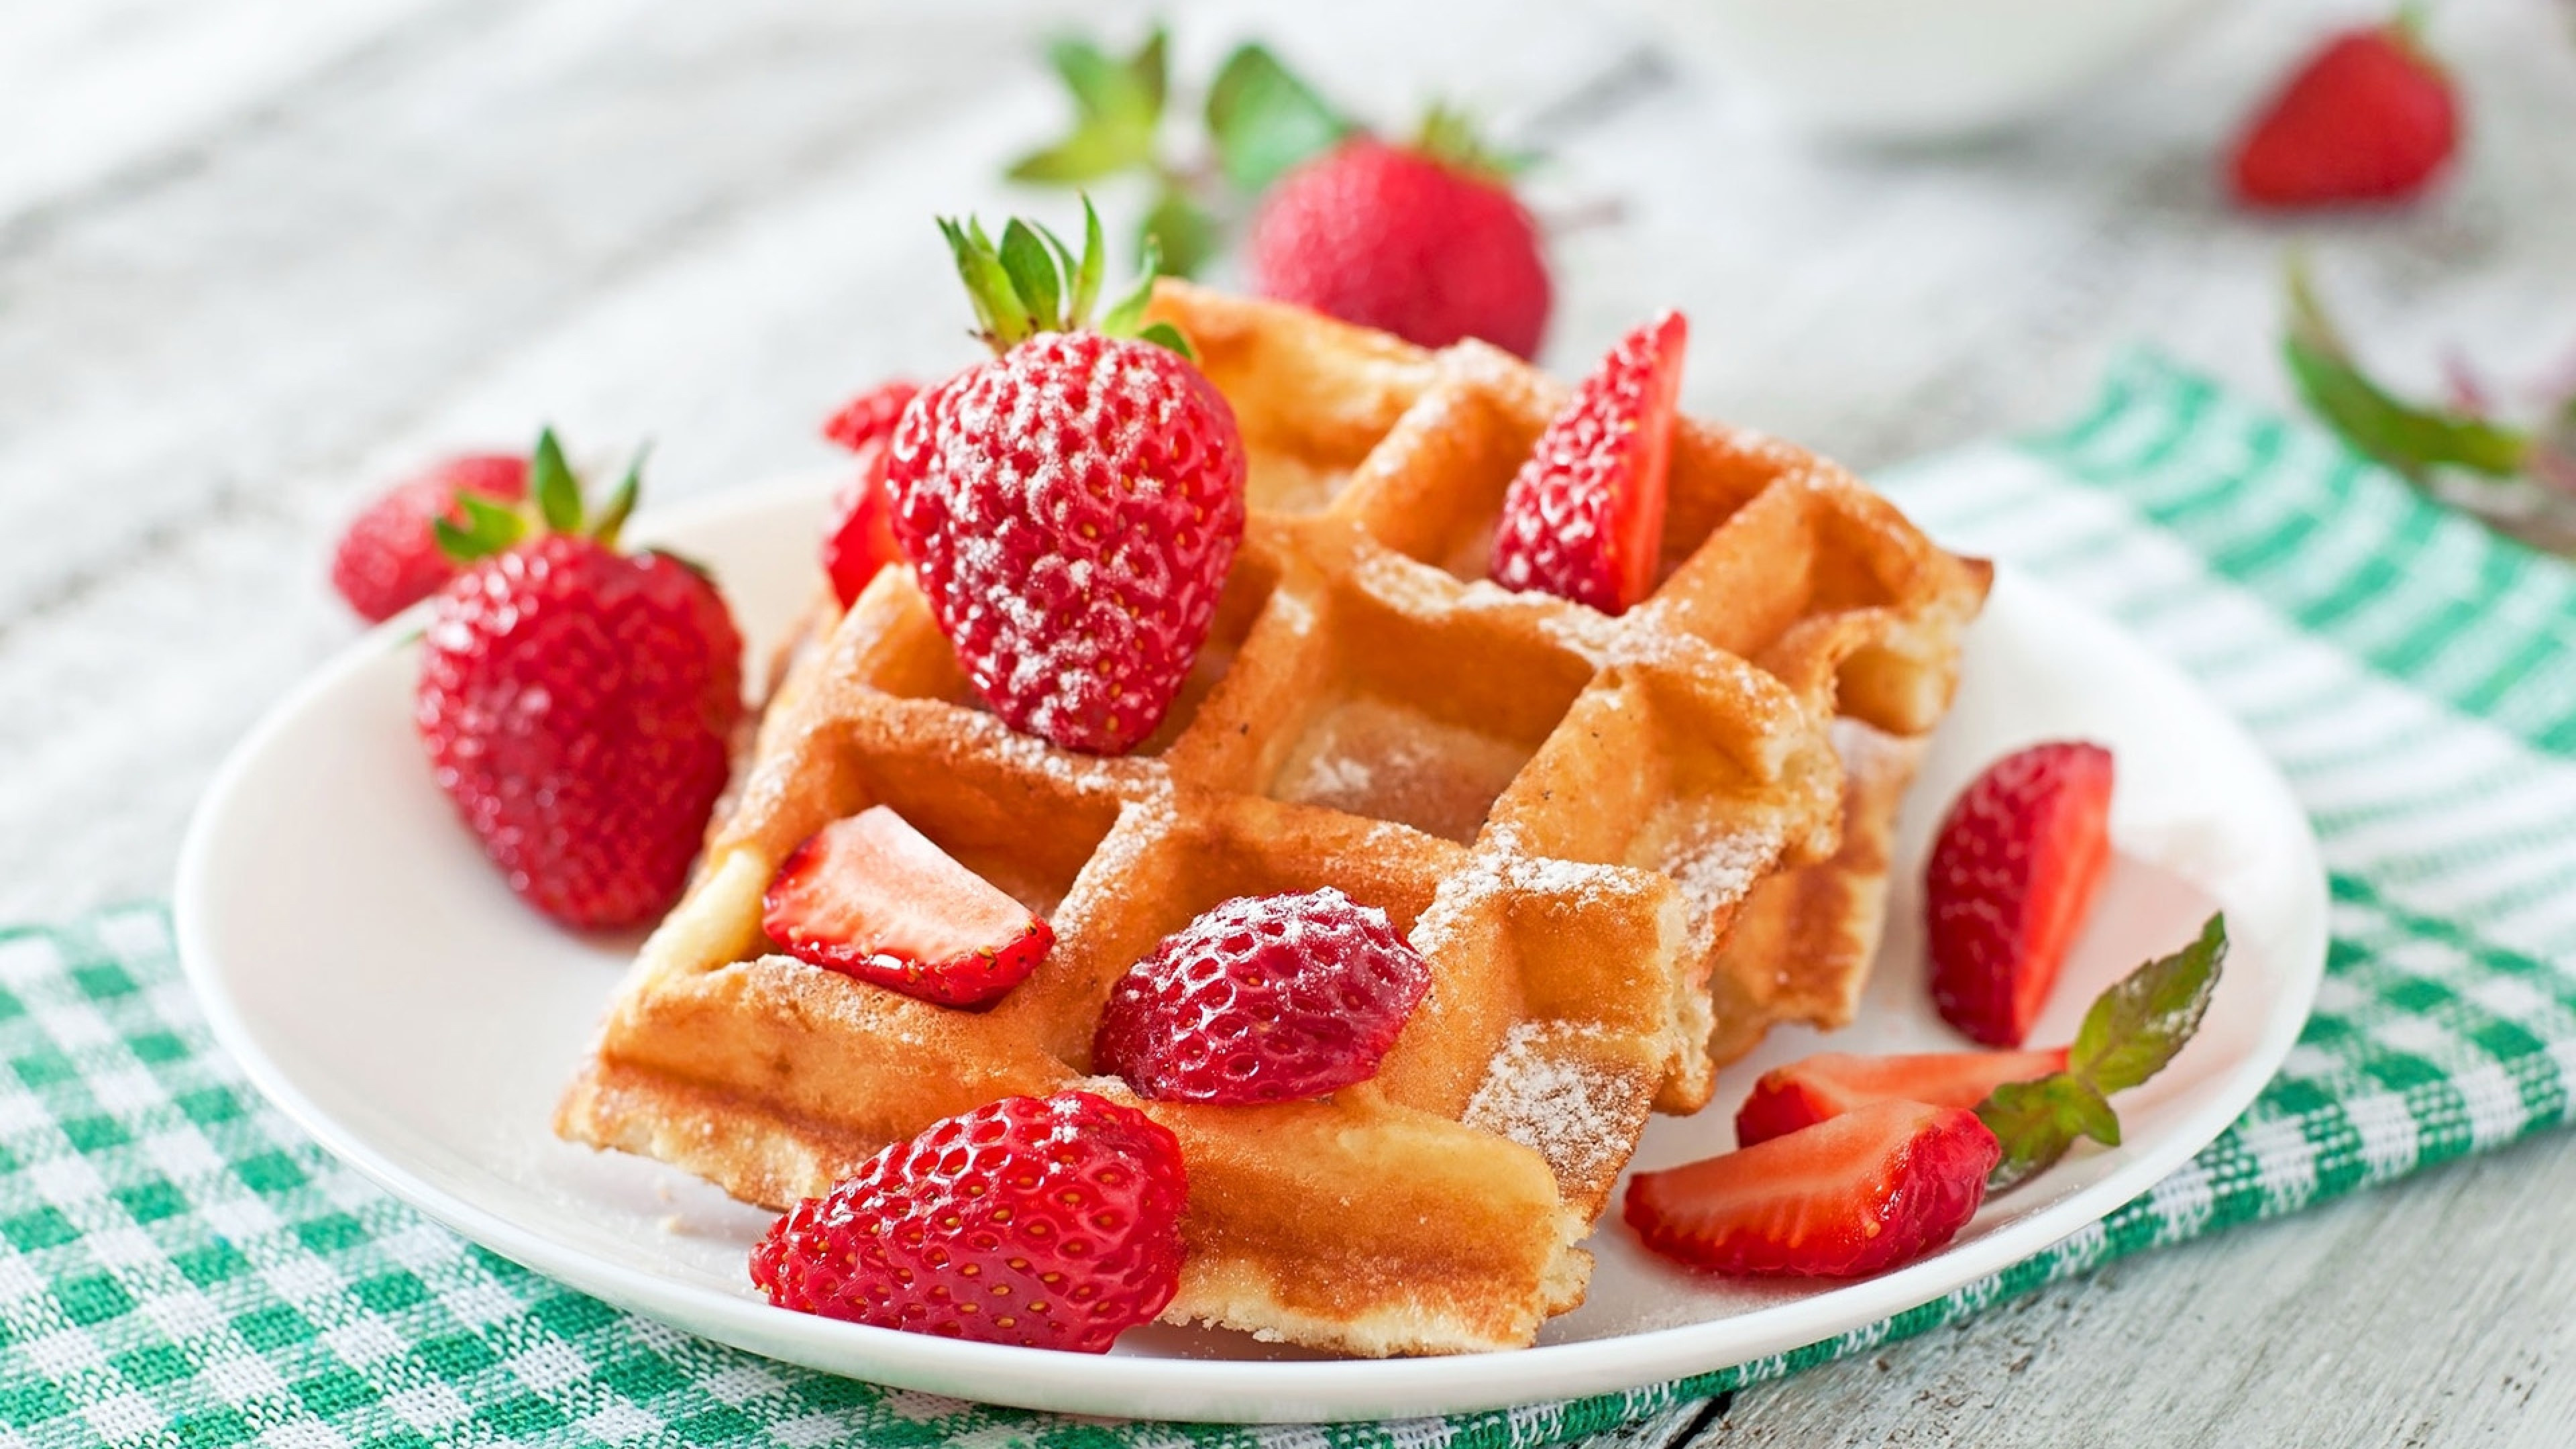 Waffle: A popular breakfast food, often topped with fruit preserves. 3840x2160 4K Background.